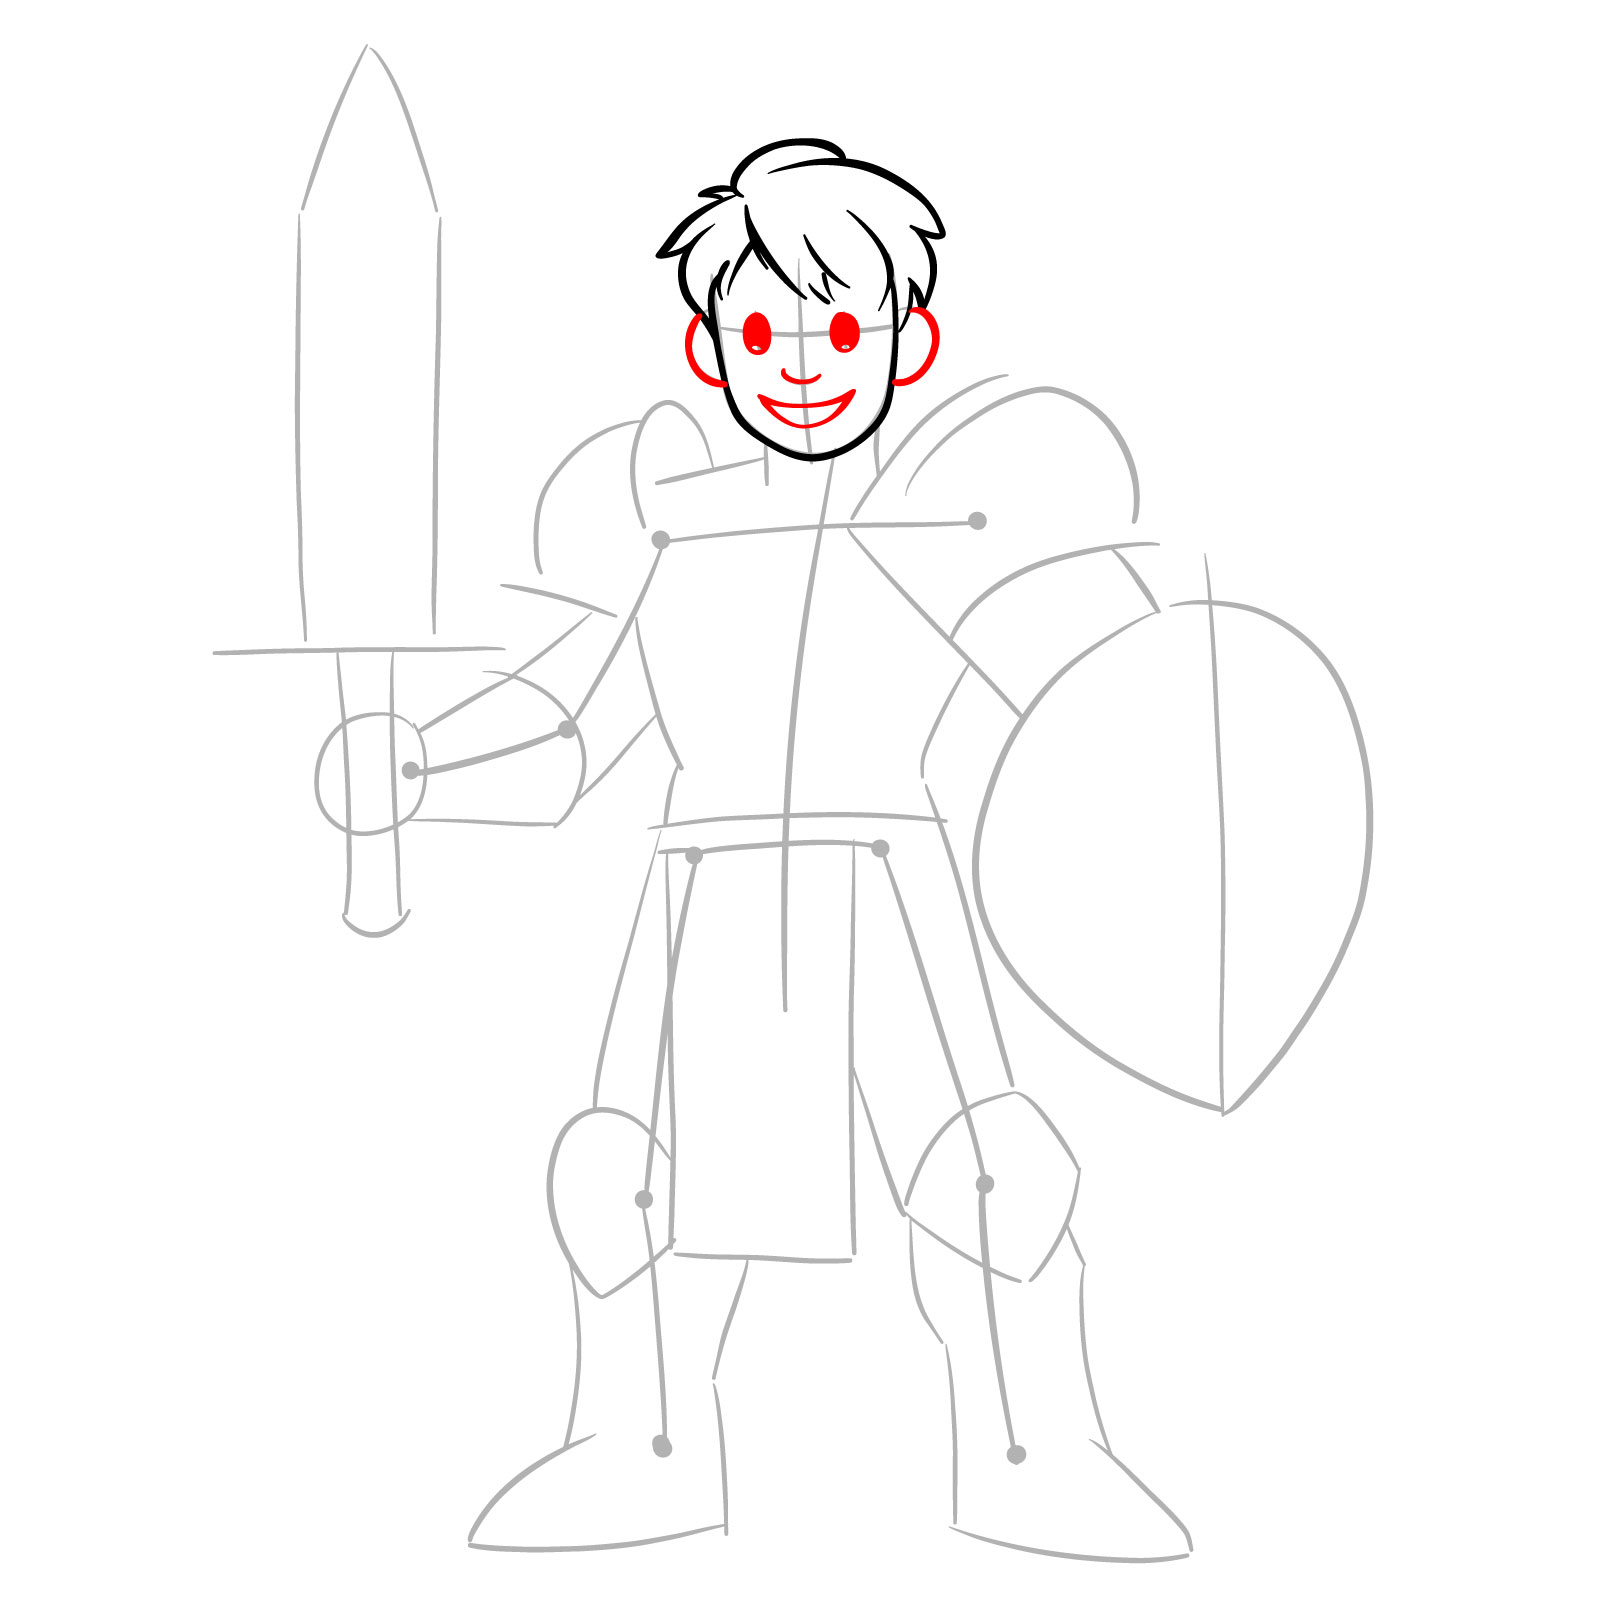 paladin drawing step 6: eyes, nose, mouth, and ears